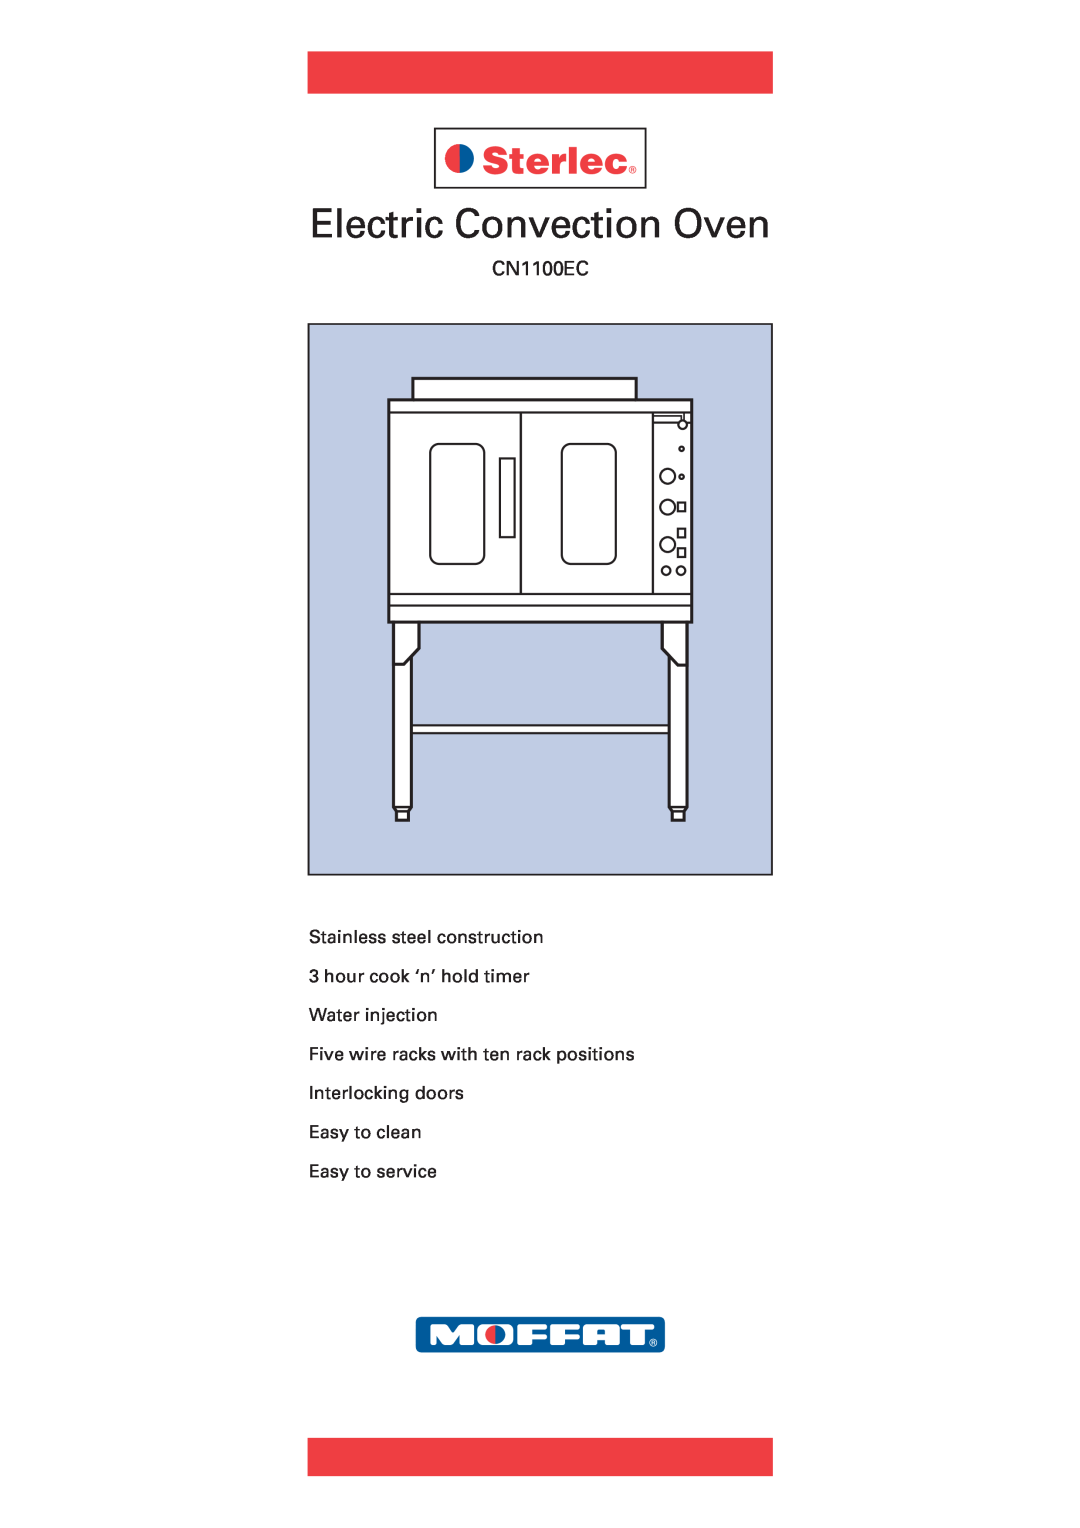 Moffat CN1100EC manual Electric Convection Oven, Five wire racks with ten rack positions 